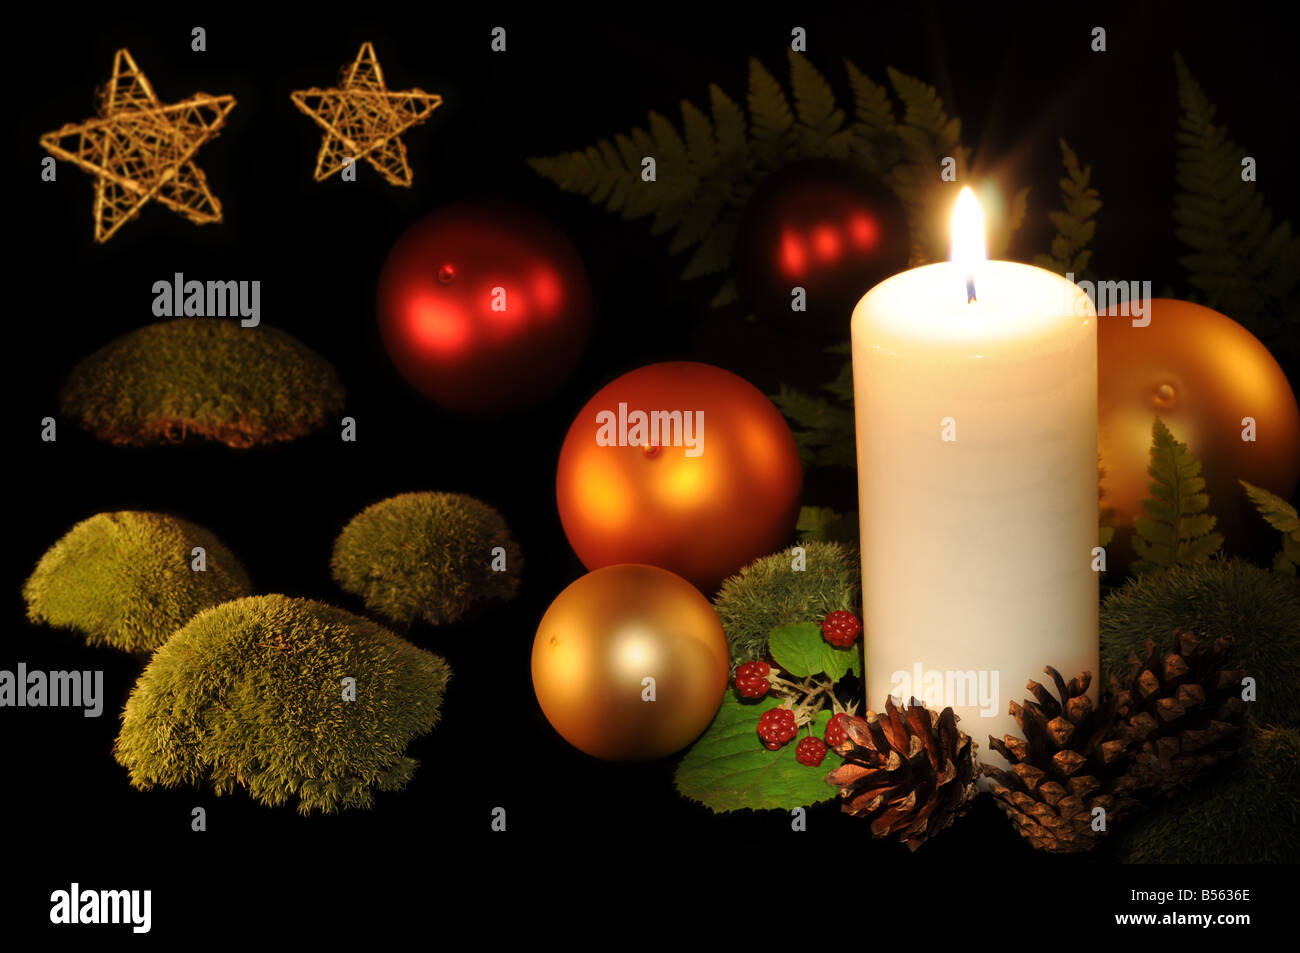 Christmas decoration: Christmas balls, burning white candle, berries, moss mounds and fern on black background. Stock Photo